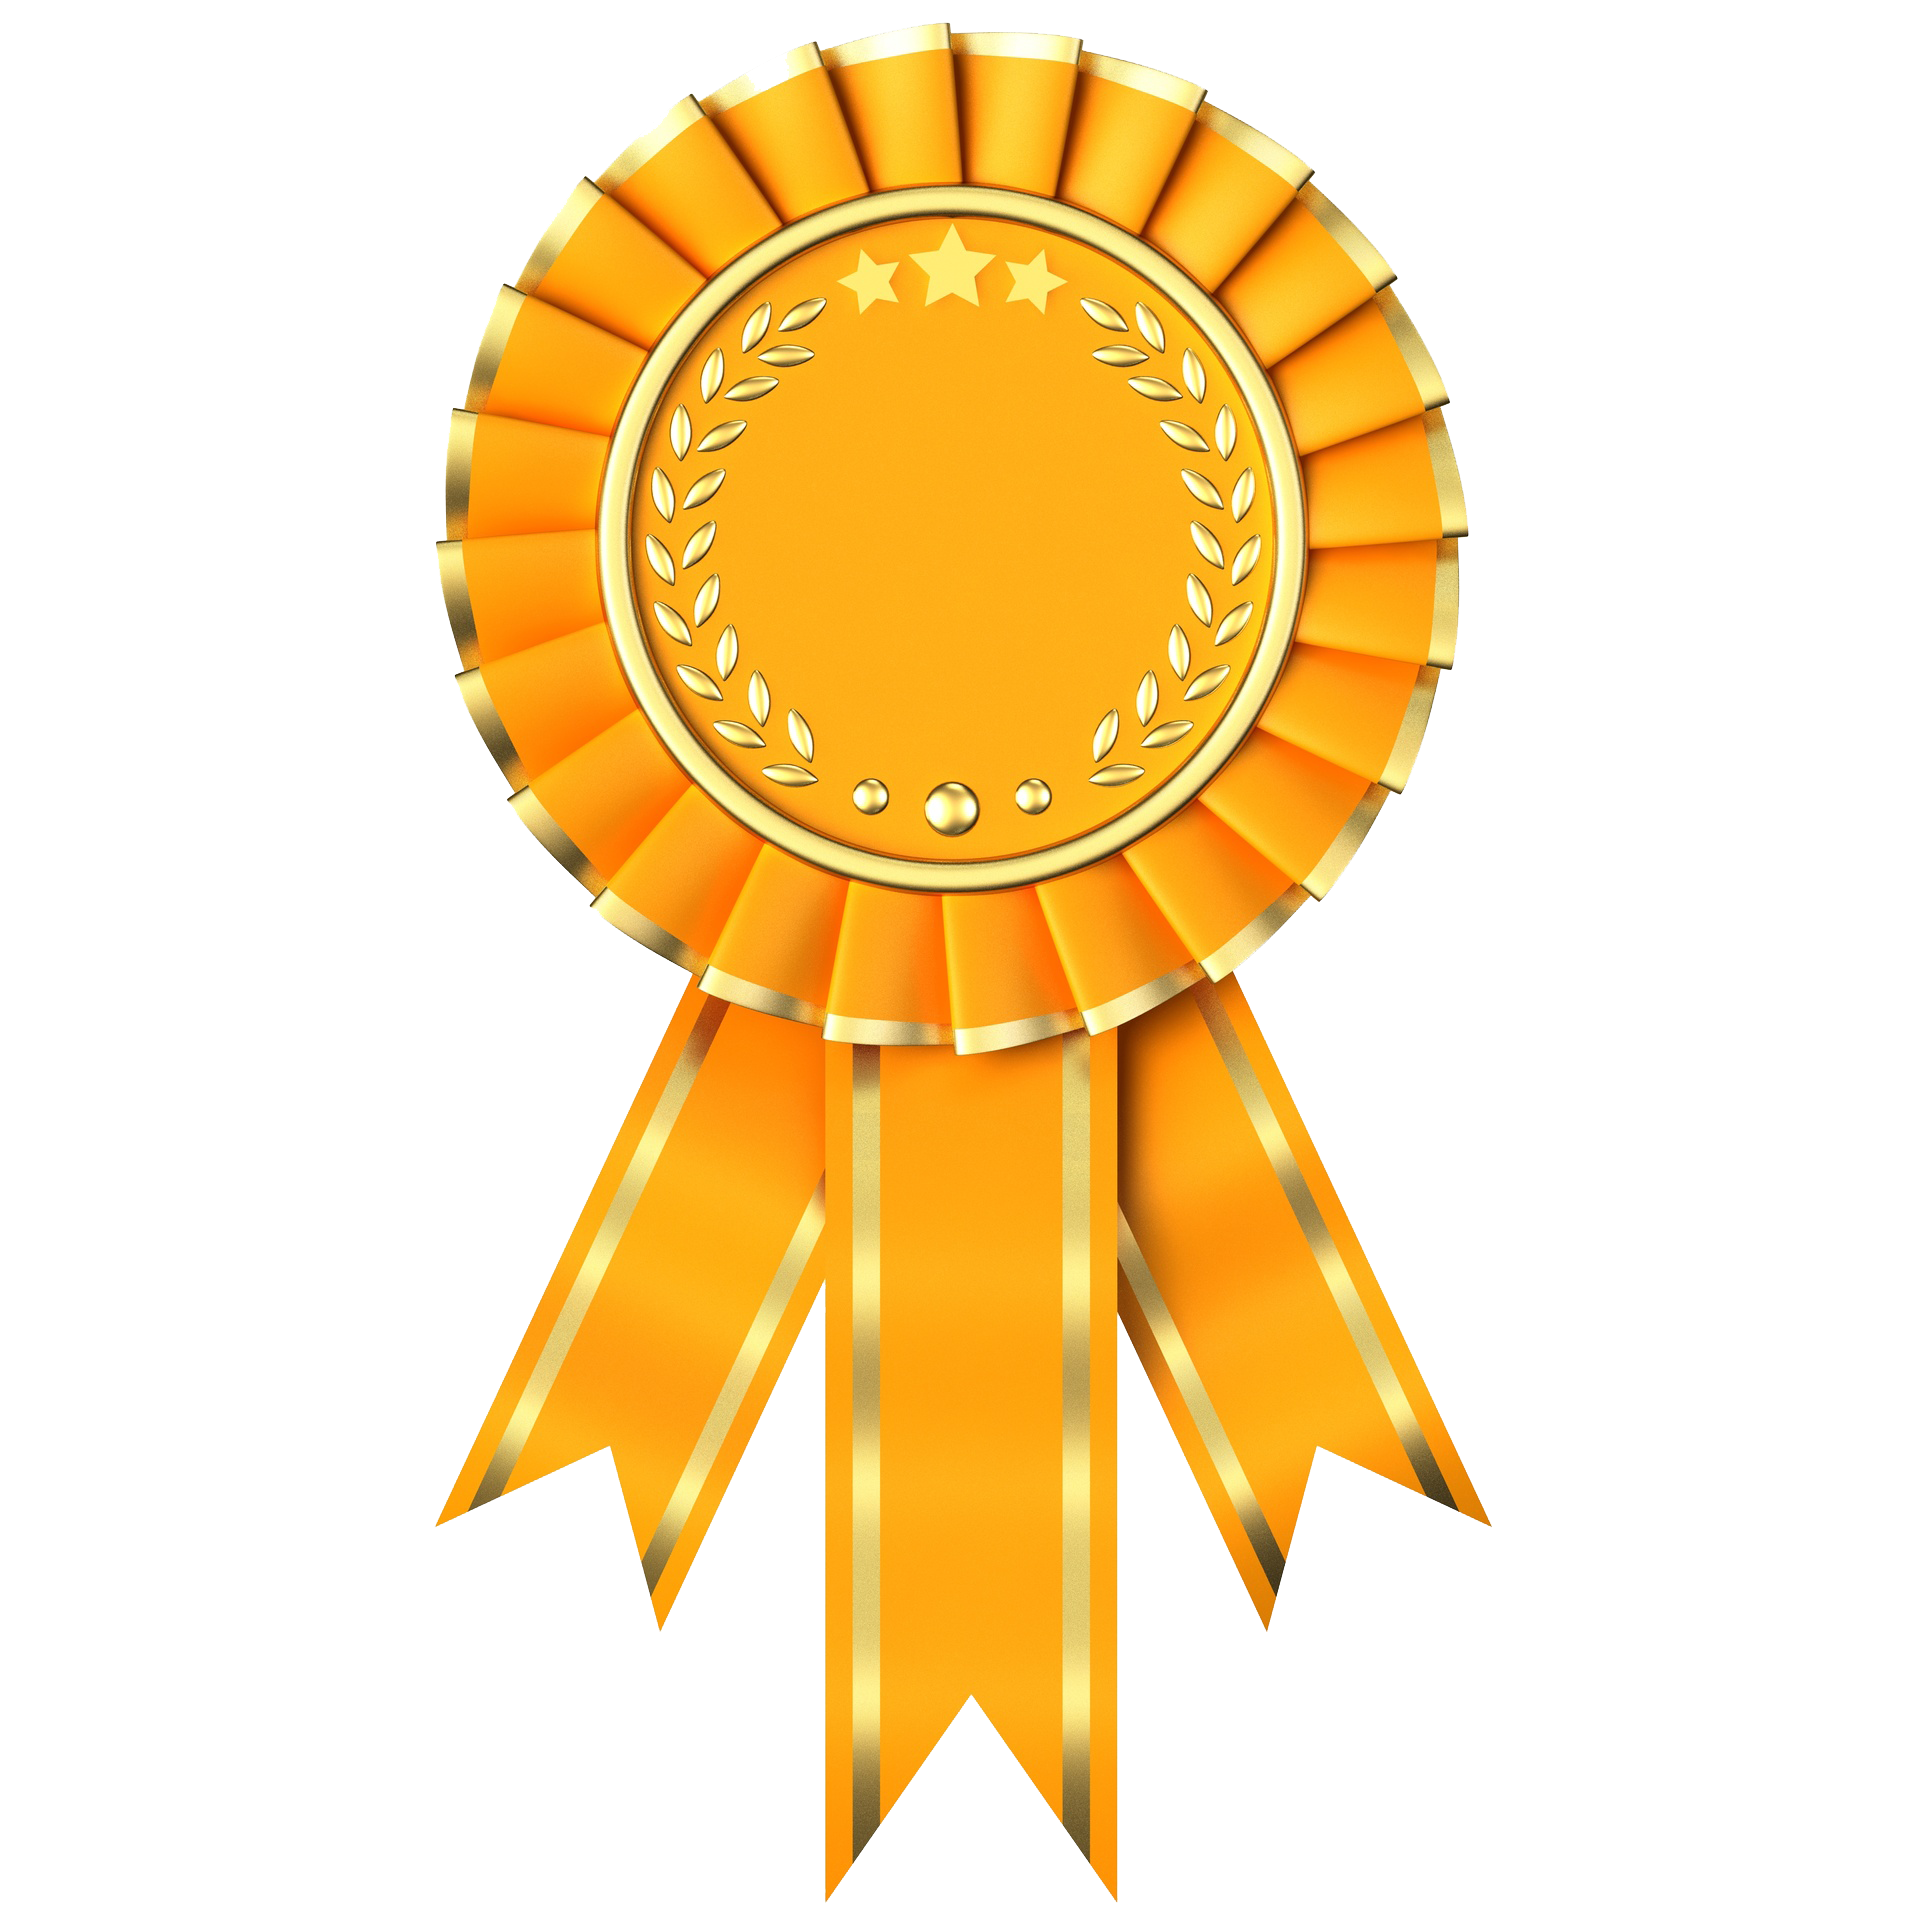 United Prize For Winner States Excellence Images Clipart